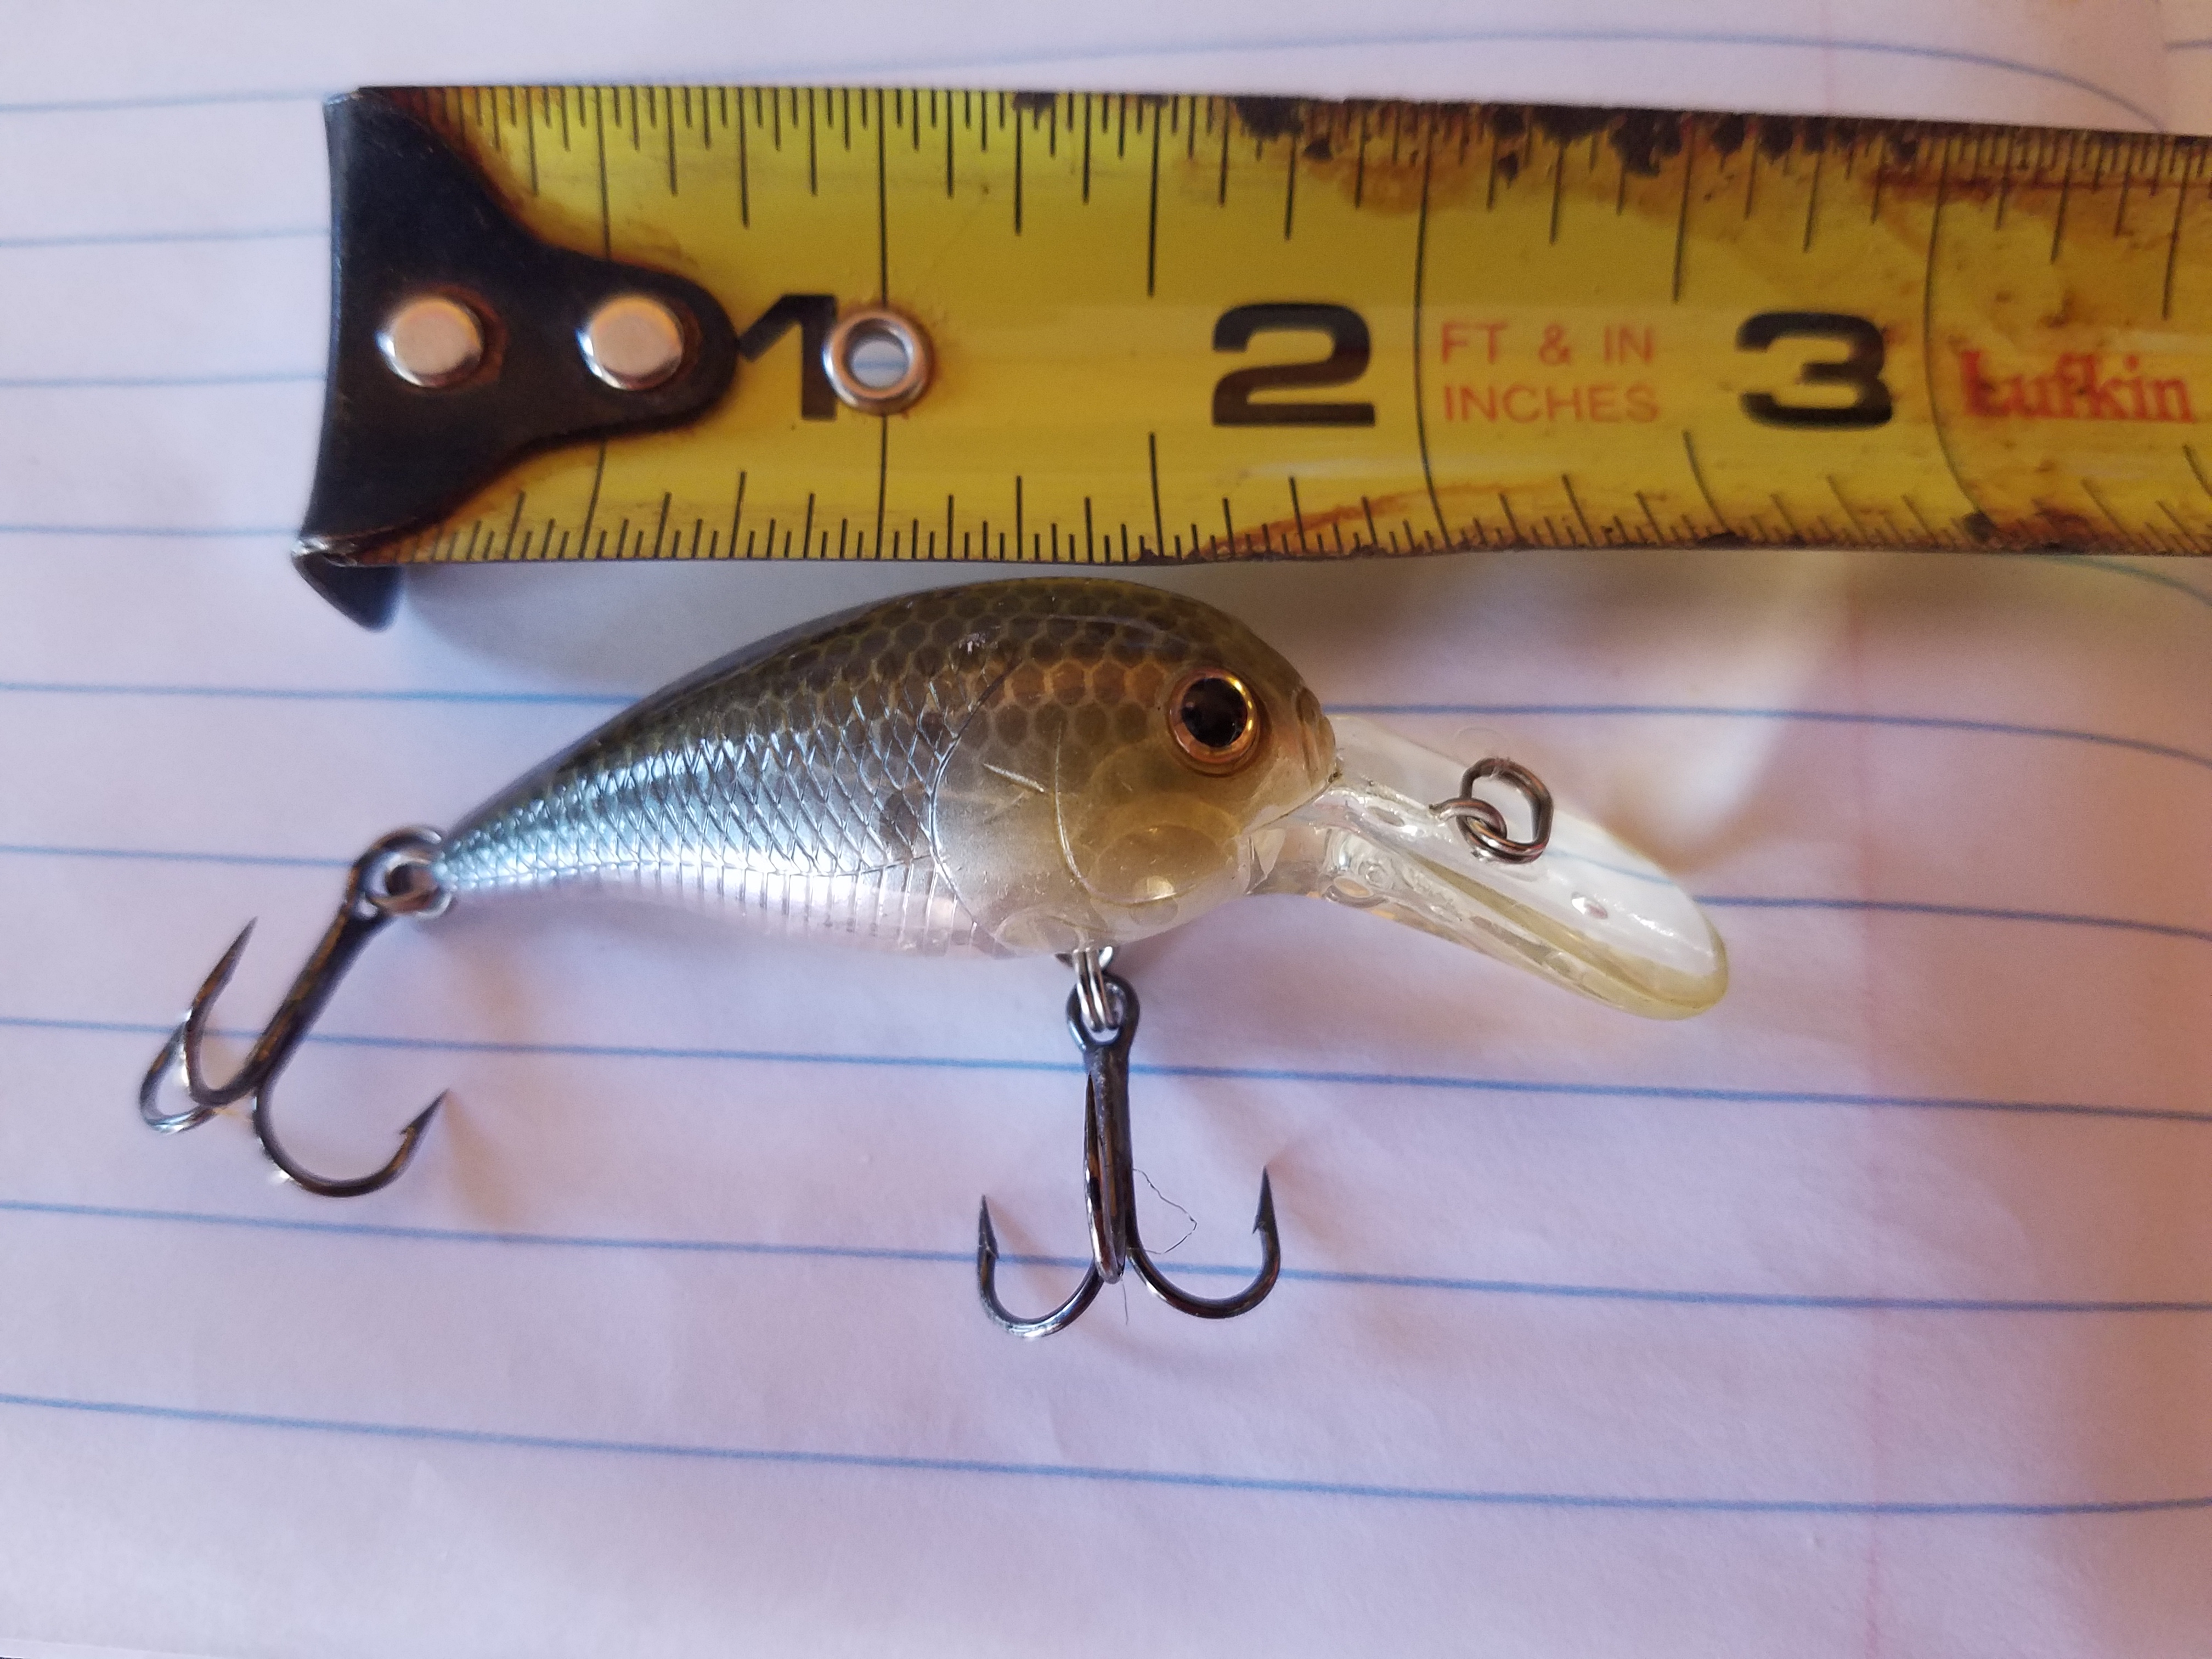 What crank bait have you used for trolling for crappie?